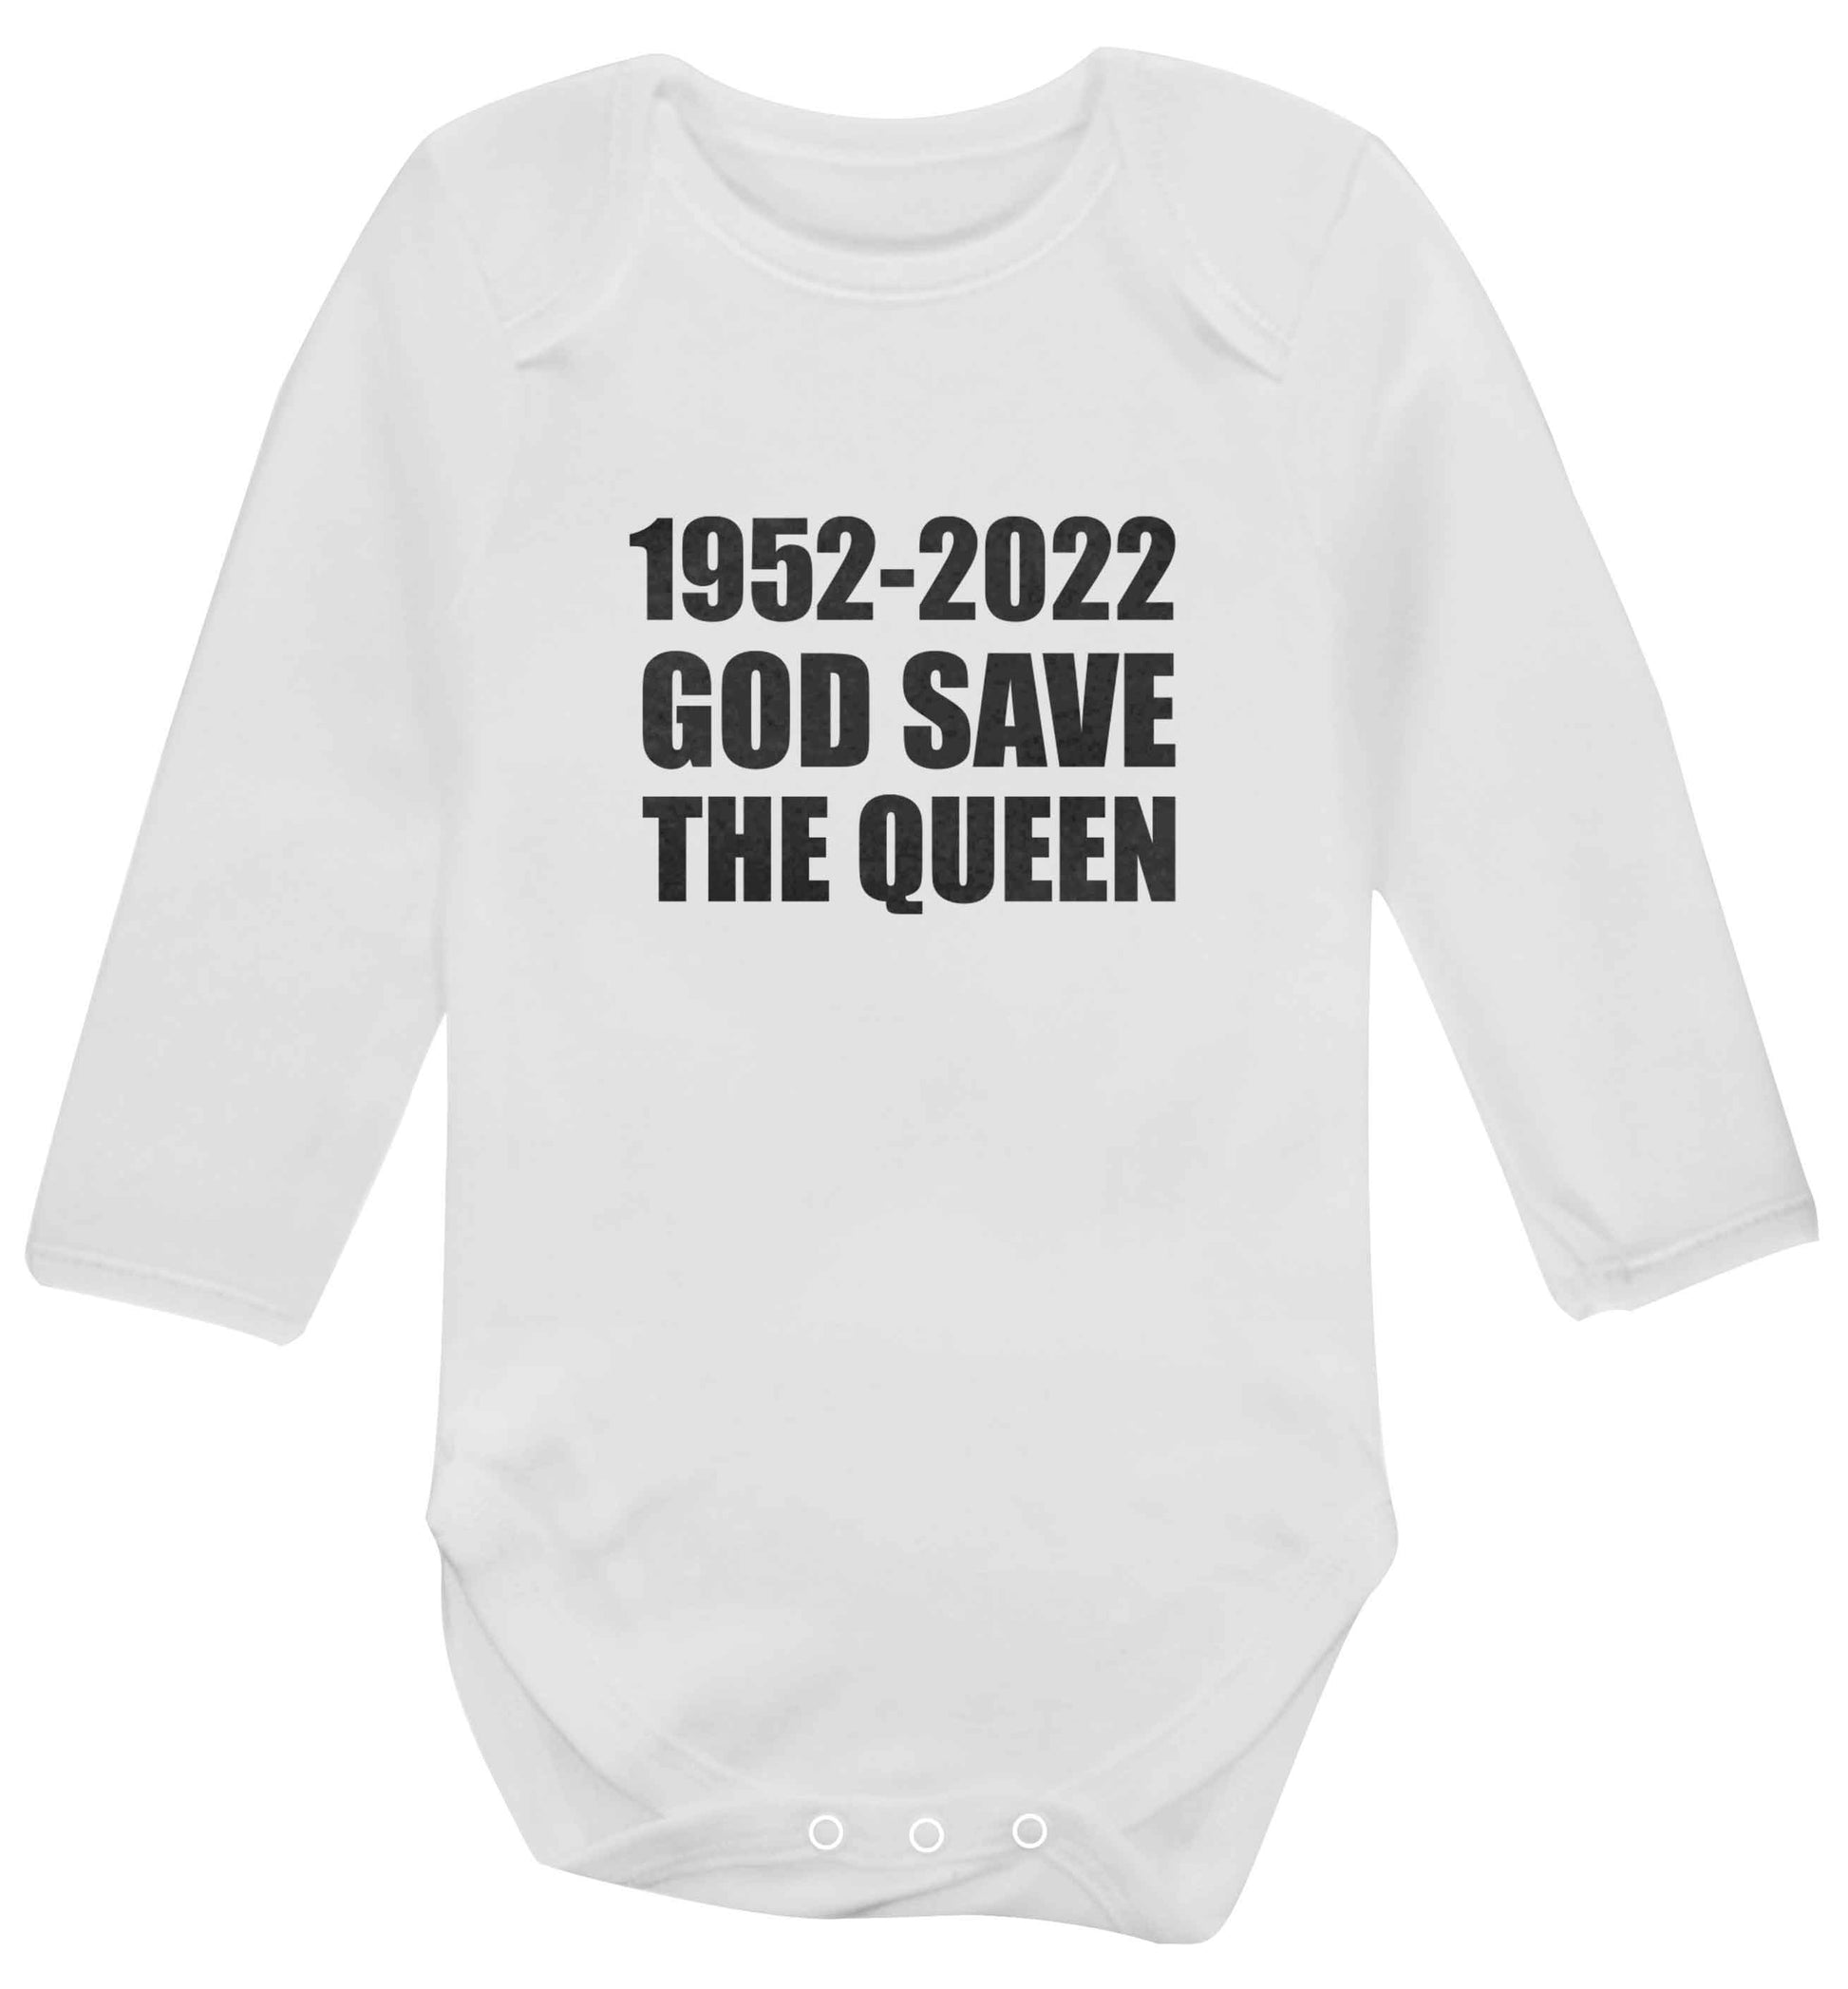 God save the queen baby vest long sleeved white 6-12 months